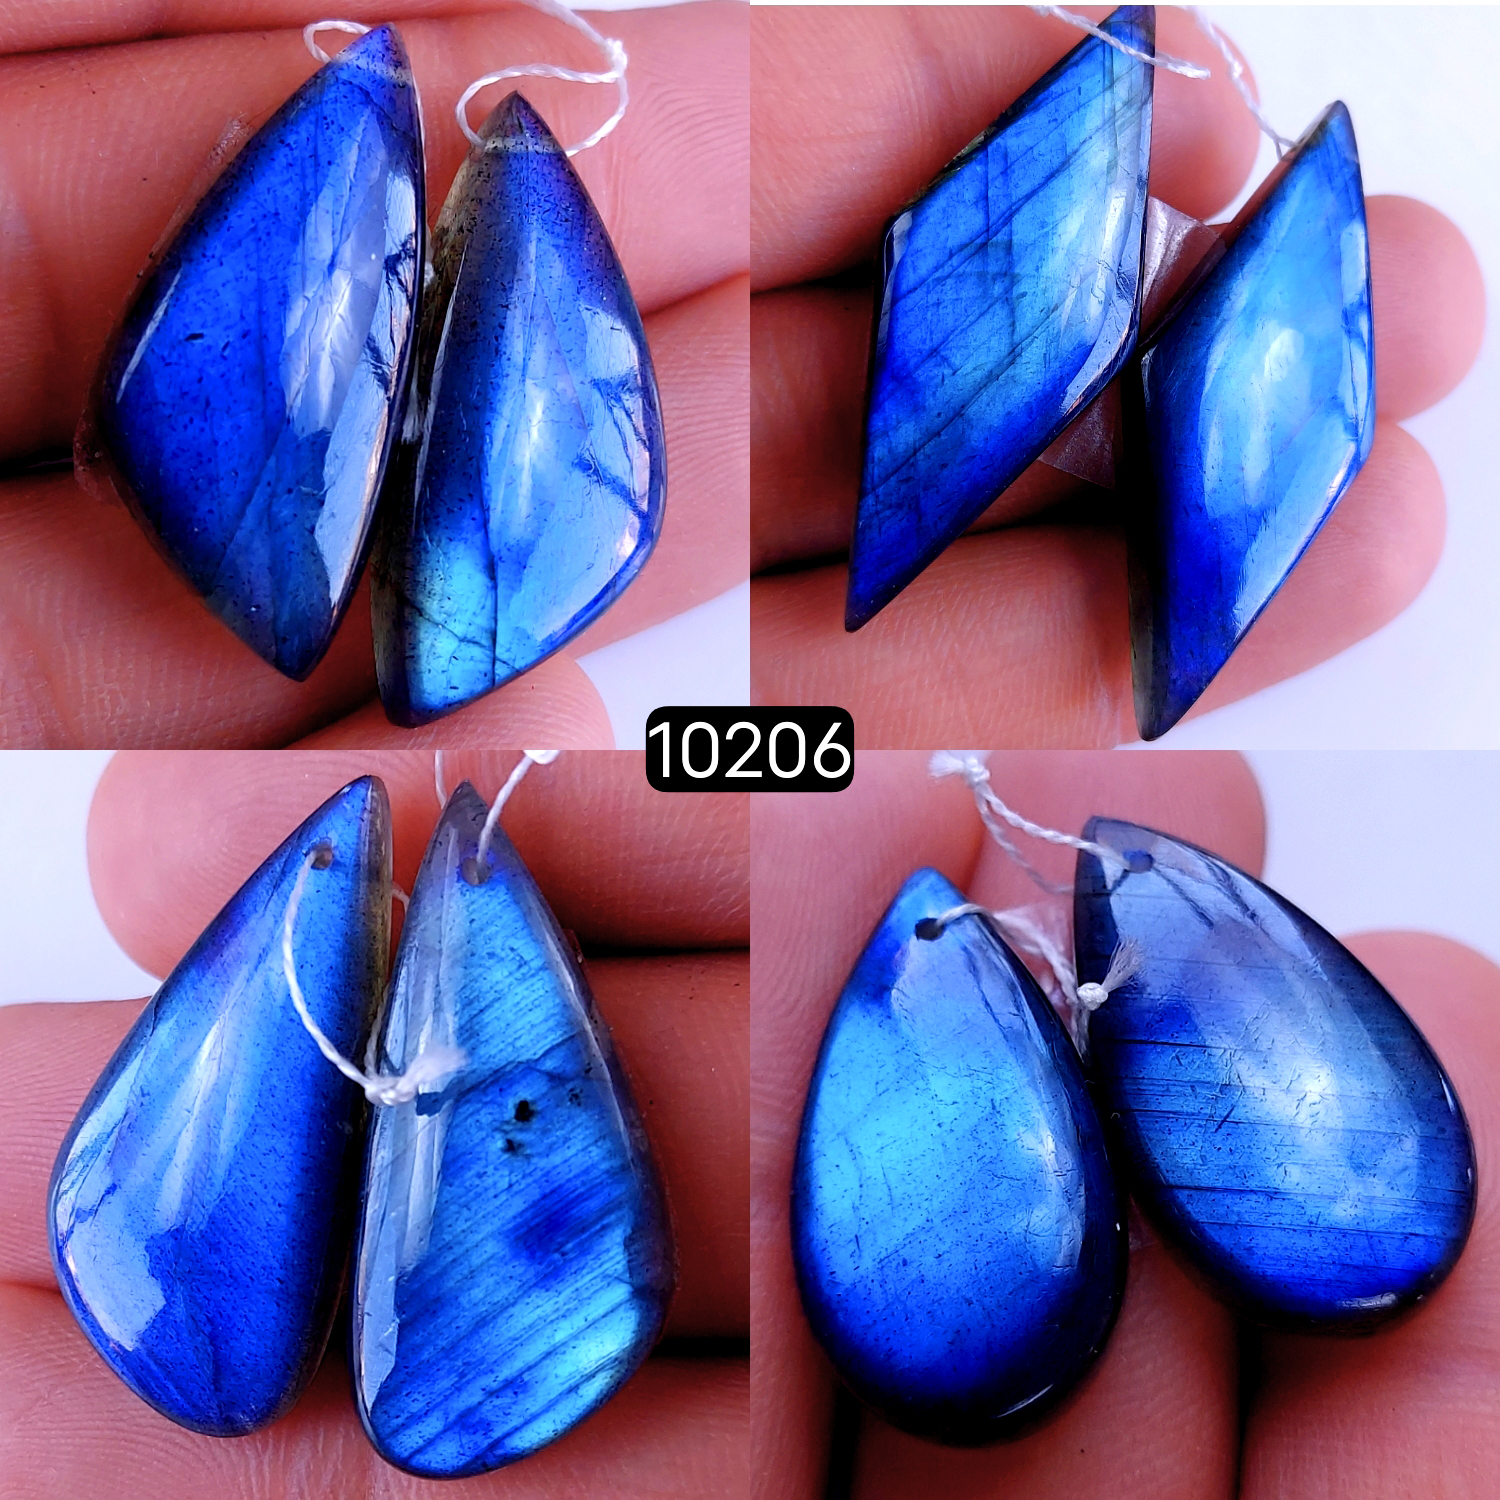 4Pair 151Cts Natural Labradorite Crystal Drill Dangle Drop Earring Pairs Silver Earrings Blue Labradorite Hoop Jewelry  42x15 26x15mm #10206